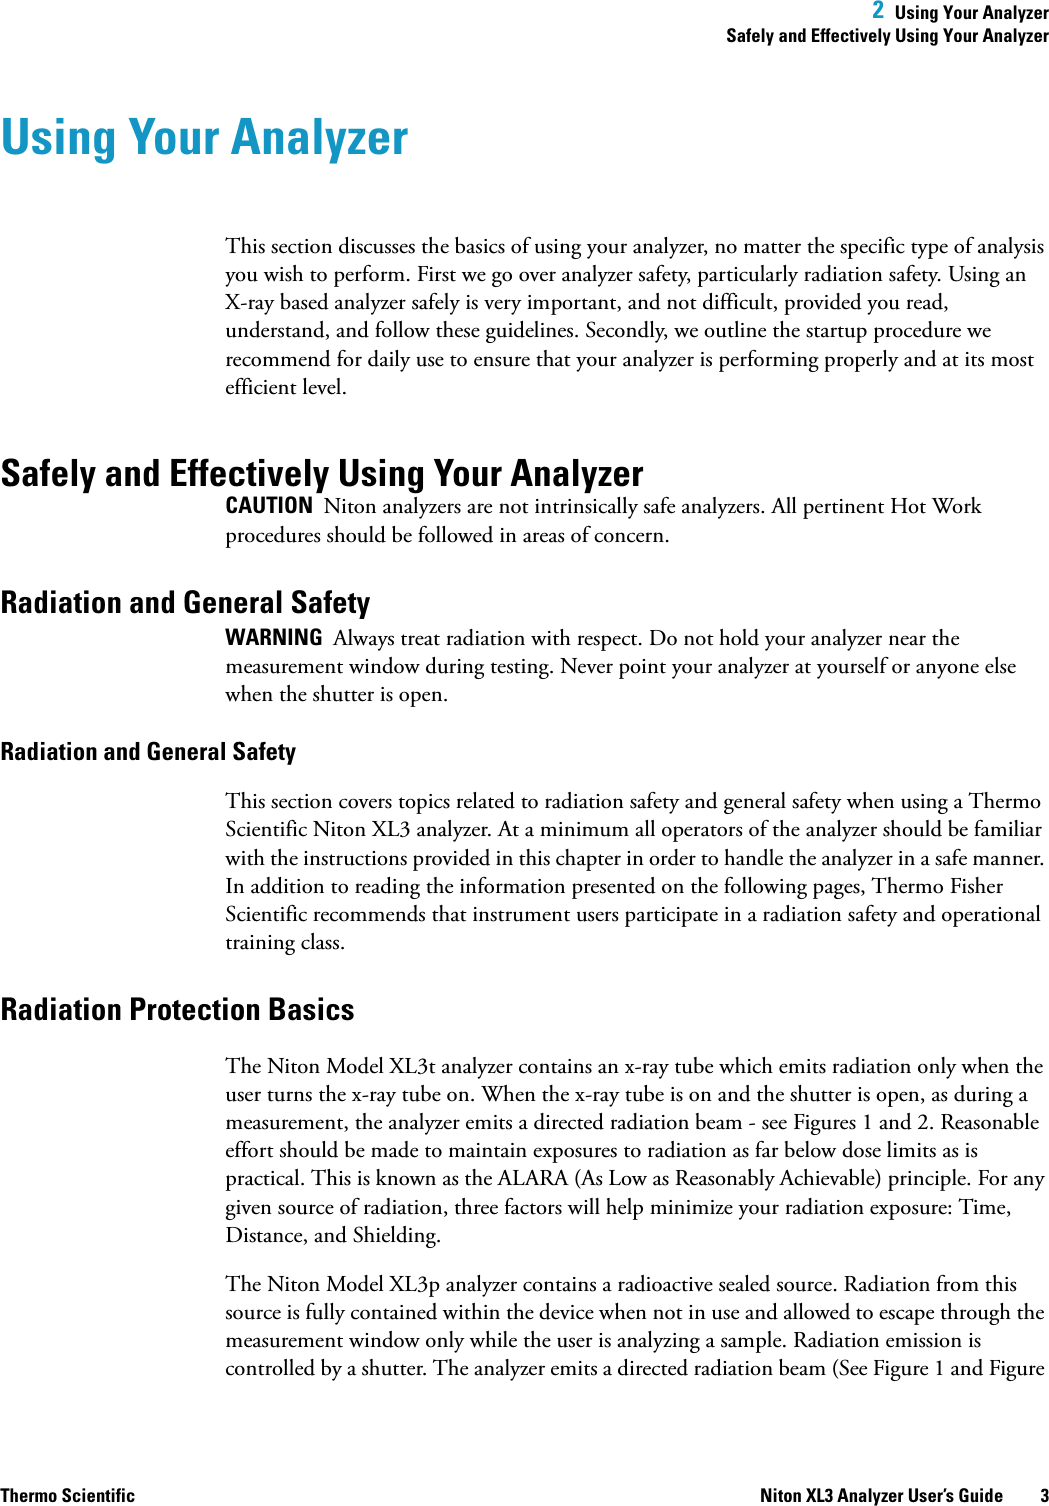  2  Using Your AnalyzerSafely and Effectively Using Your AnalyzerThermo Scientific Niton XL3 Analyzer User’s Guide 3Using Your AnalyzerThis section discusses the basics of using your analyzer, no matter the specific type of analysis you wish to perform. First we go over analyzer safety, particularly radiation safety. Using an X-ray based analyzer safely is very important, and not difficult, provided you read, understand, and follow these guidelines. Secondly, we outline the startup procedure we recommend for daily use to ensure that your analyzer is performing properly and at its most efficient level. Safely and Effectively Using Your AnalyzerCAUTION  Niton analyzers are not intrinsically safe analyzers. All pertinent Hot Work procedures should be followed in areas of concern.Radiation and General SafetyWARNING  Always treat radiation with respect. Do not hold your analyzer near the measurement window during testing. Never point your analyzer at yourself or anyone else when the shutter is open. Radiation and General SafetyThis section covers topics related to radiation safety and general safety when using a Thermo Scientific Niton XL3 analyzer. At a minimum all operators of the analyzer should be familiar with the instructions provided in this chapter in order to handle the analyzer in a safe manner. In addition to reading the information presented on the following pages, Thermo Fisher Scientific recommends that instrument users participate in a radiation safety and operational training class.Radiation Protection BasicsThe Niton Model XL3t analyzer contains an x-ray tube which emits radiation only when the user turns the x-ray tube on. When the x-ray tube is on and the shutter is open, as during a measurement, the analyzer emits a directed radiation beam - see Figures 1 and 2. Reasonable effort should be made to maintain exposures to radiation as far below dose limits as is practical. This is known as the ALARA (As Low as Reasonably Achievable) principle. For any given source of radiation, three factors will help minimize your radiation exposure: Time, Distance, and Shielding.The Niton Model XL3p analyzer contains a radioactive sealed source. Radiation from this source is fully contained within the device when not in use and allowed to escape through the measurement window only while the user is analyzing a sample. Radiation emission is controlled by a shutter. The analyzer emits a directed radiation beam (See Figure 1 and Figure 